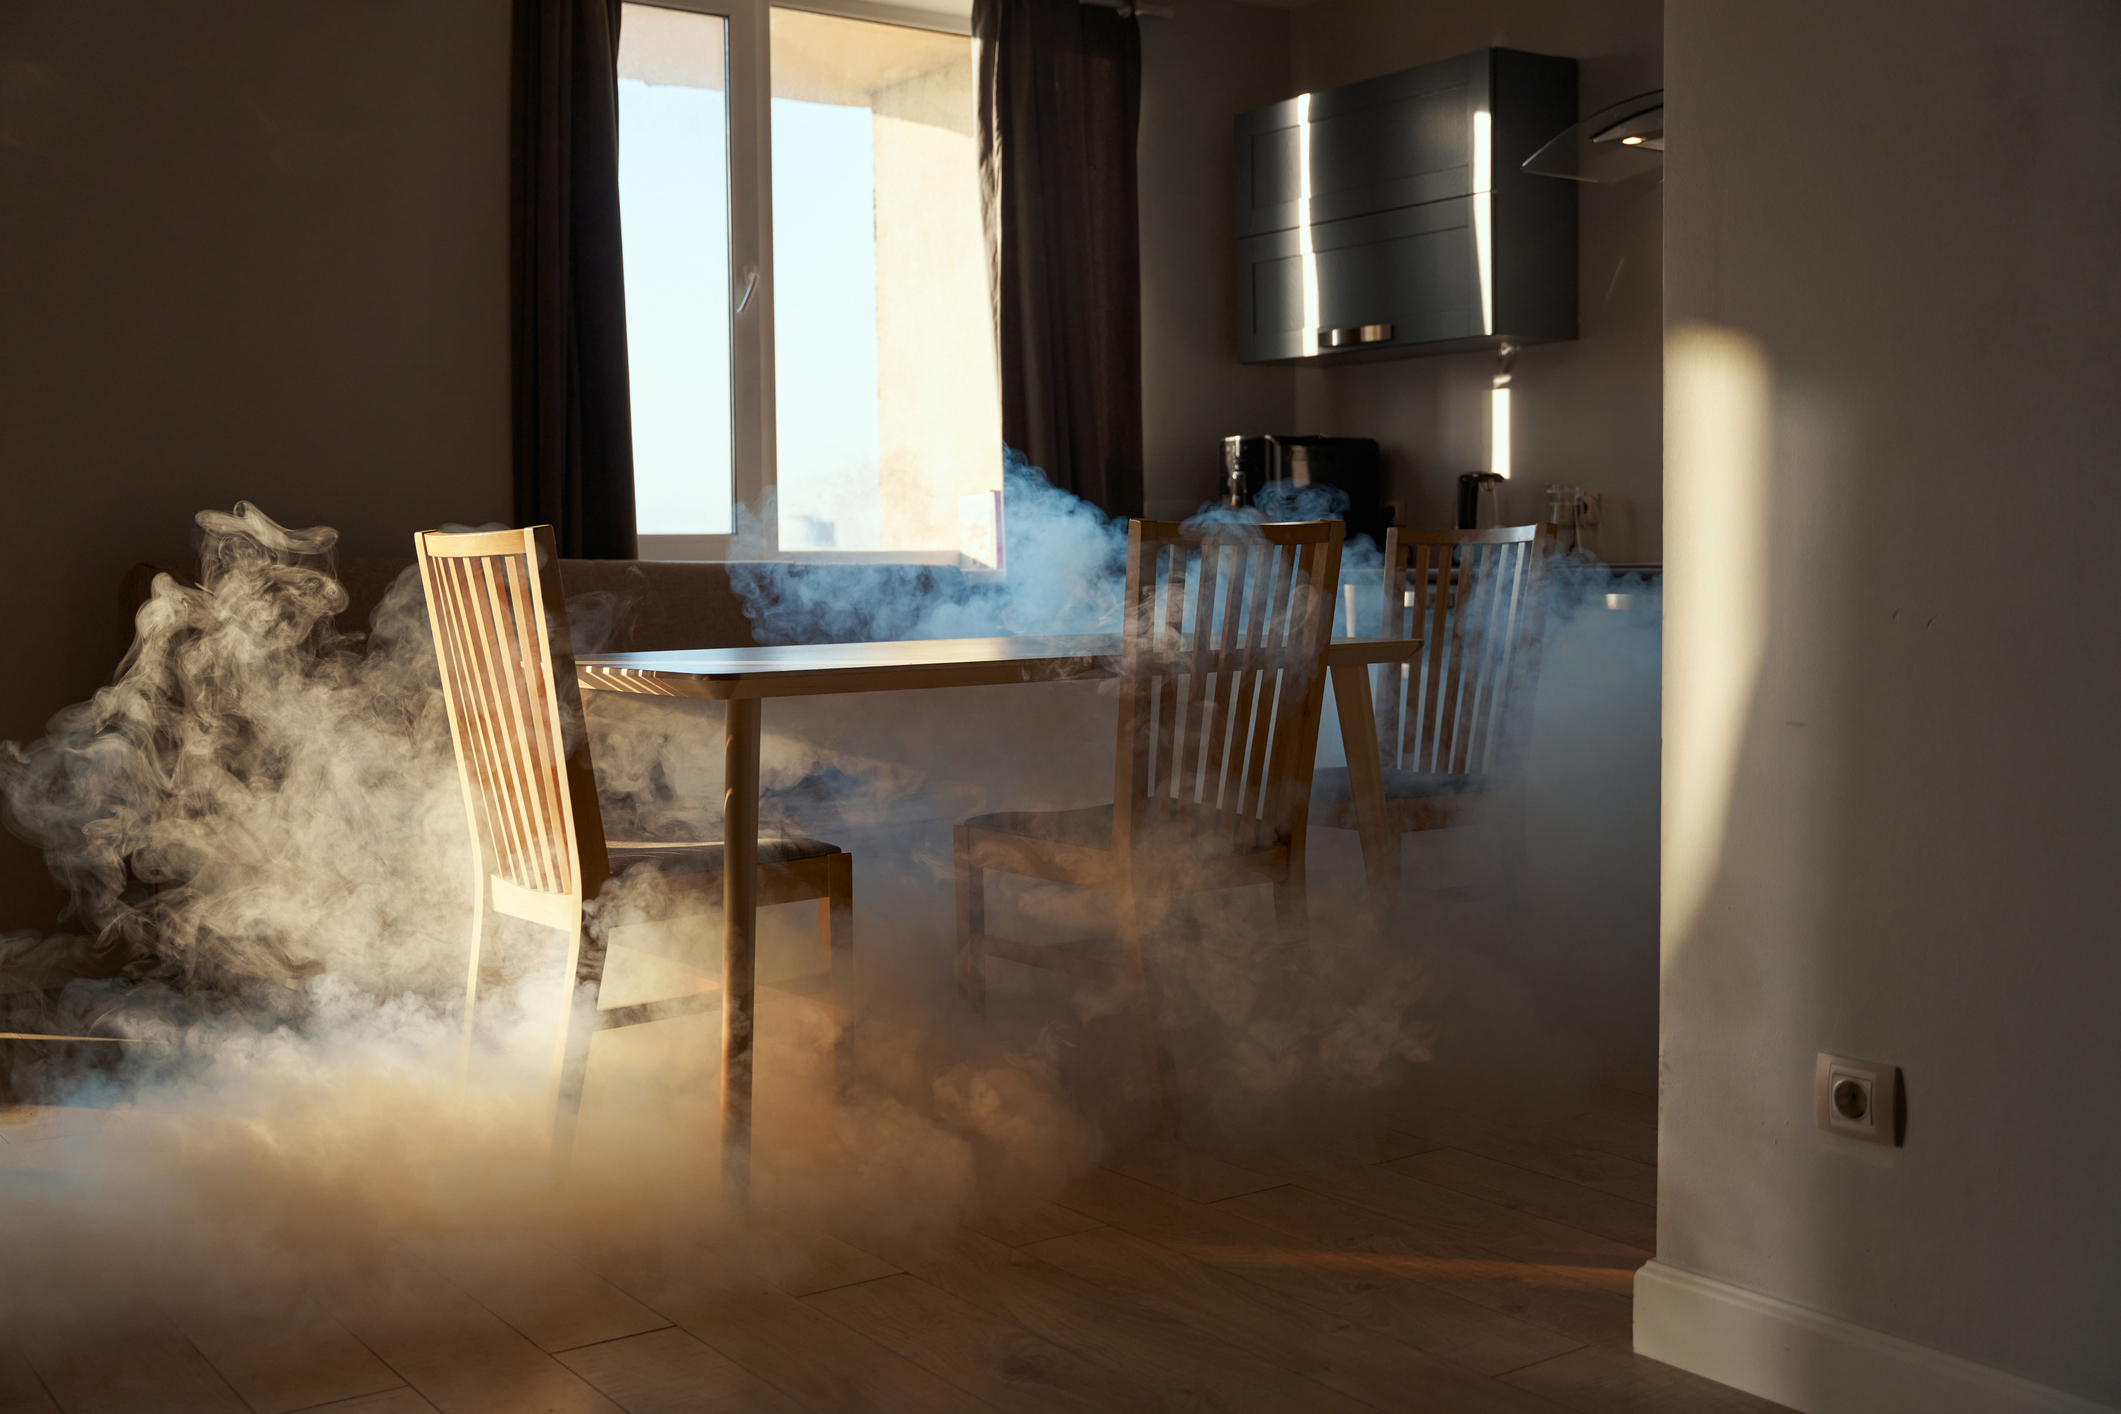 Kitchen with smoke near a dining table and chairs